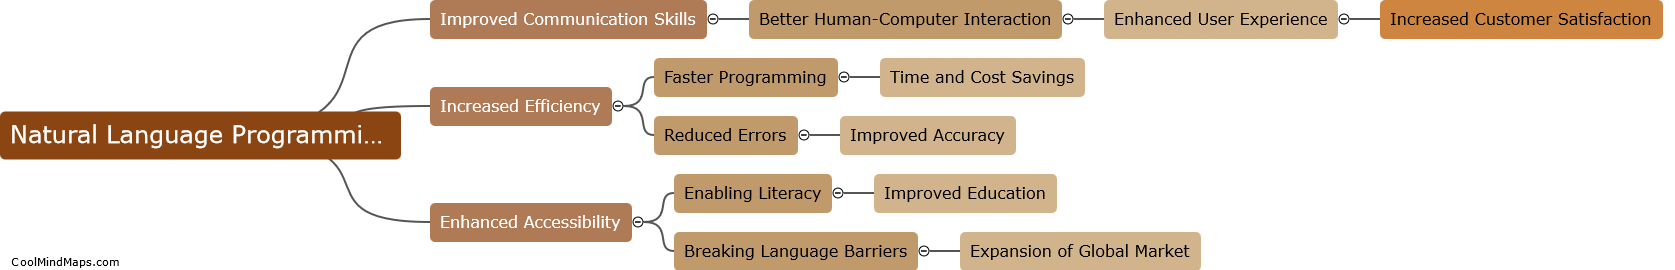 What are the potential impacts of natural language programming?